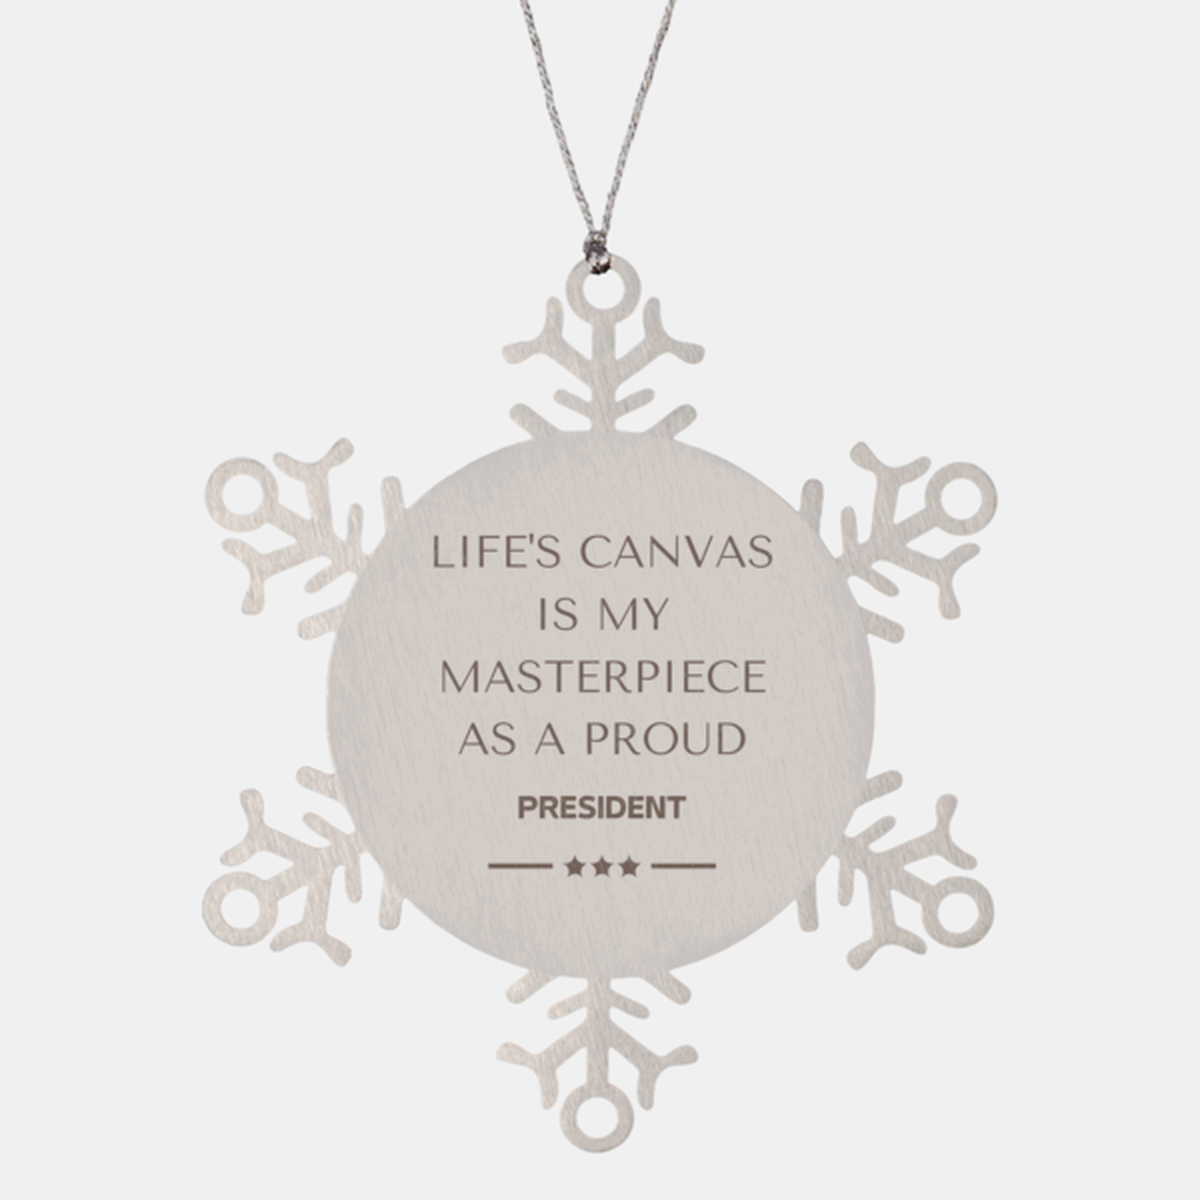 Proud President Gifts, Life's canvas is my masterpiece, Epic Birthday Christmas Unique Snowflake Ornament For President, Coworkers, Men, Women, Friends